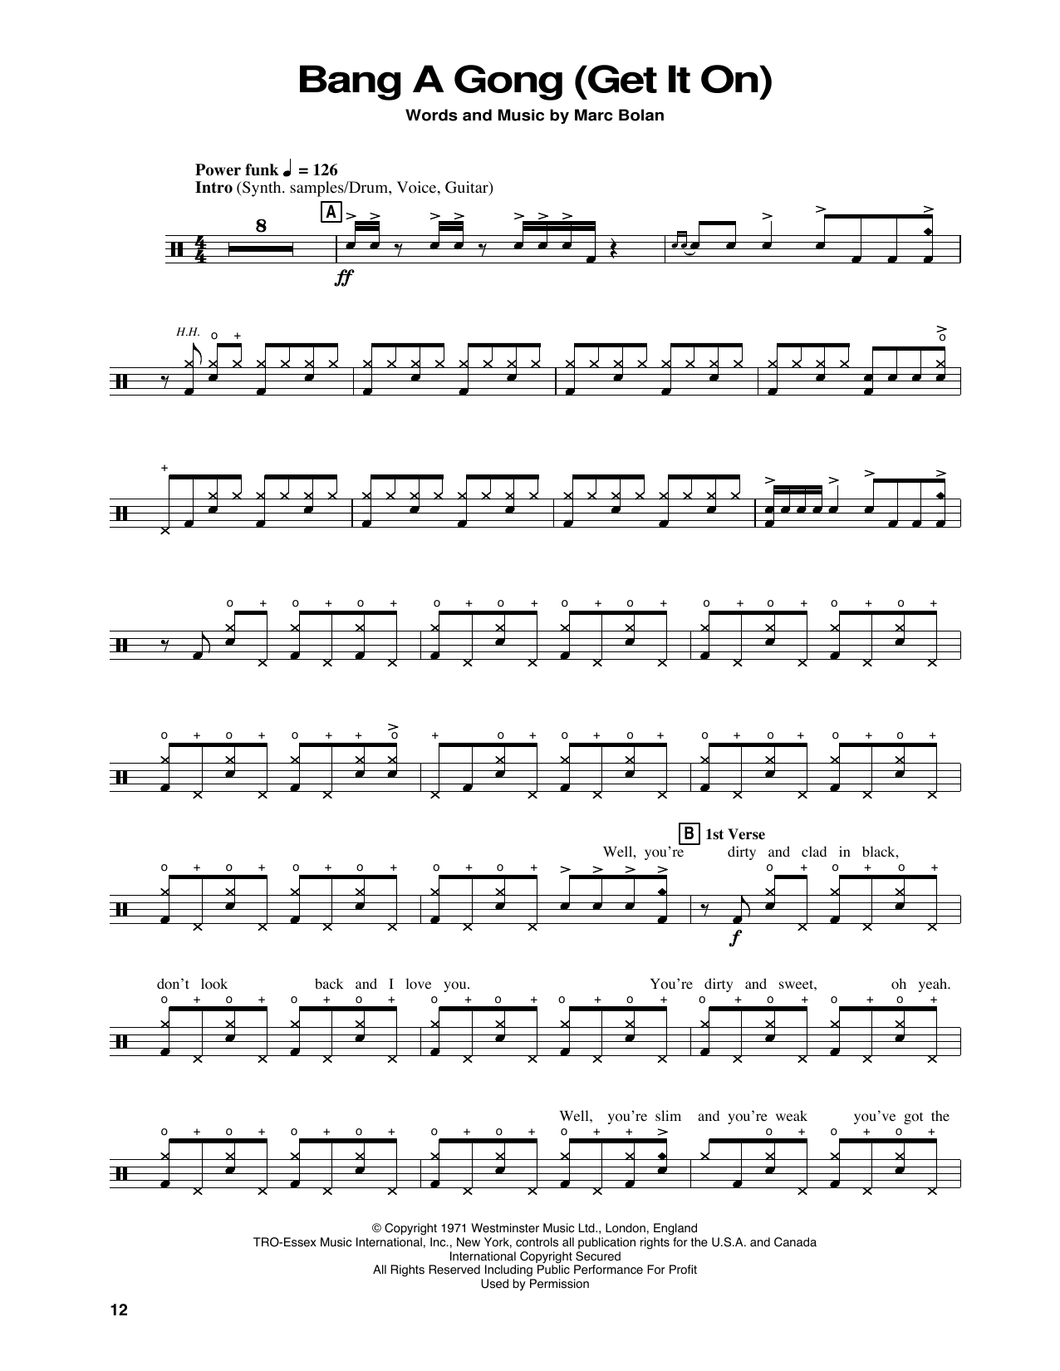 Bang a Gong (Get It On) - Power Station - Full Drum Transcription / Drum Sheet Music - SheetMusicDirect DT